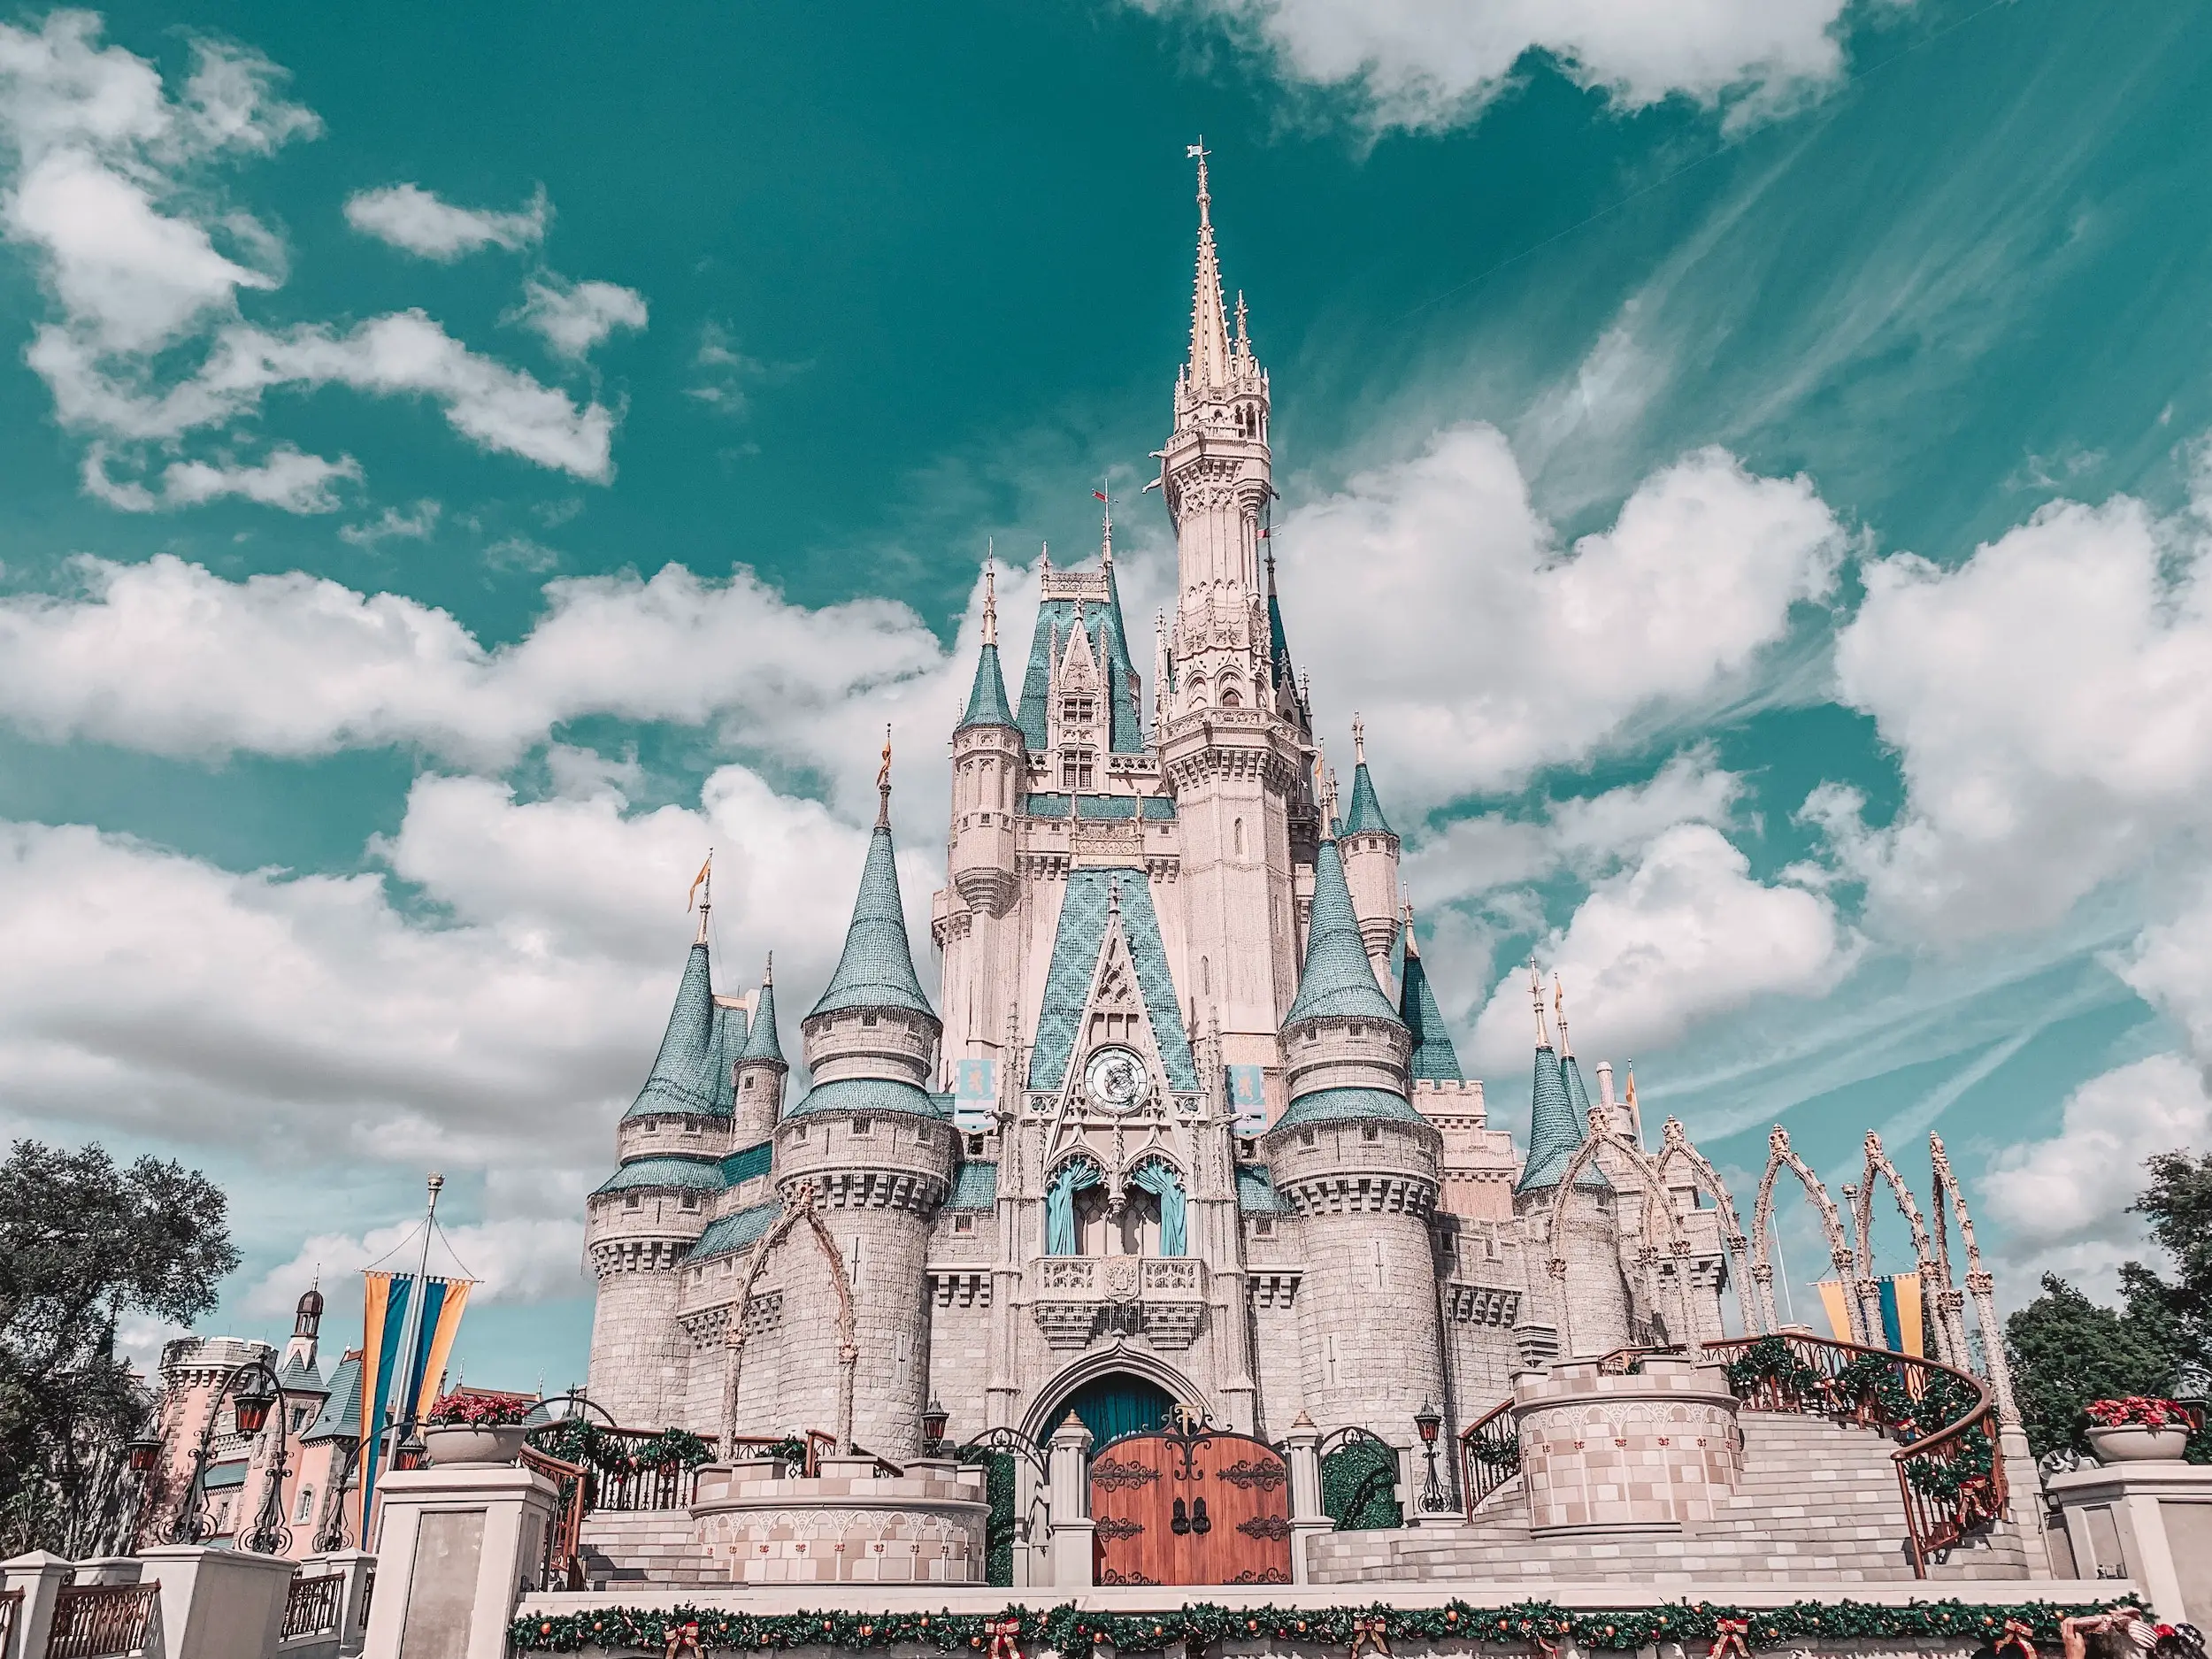 Best Theme parks for the whole family